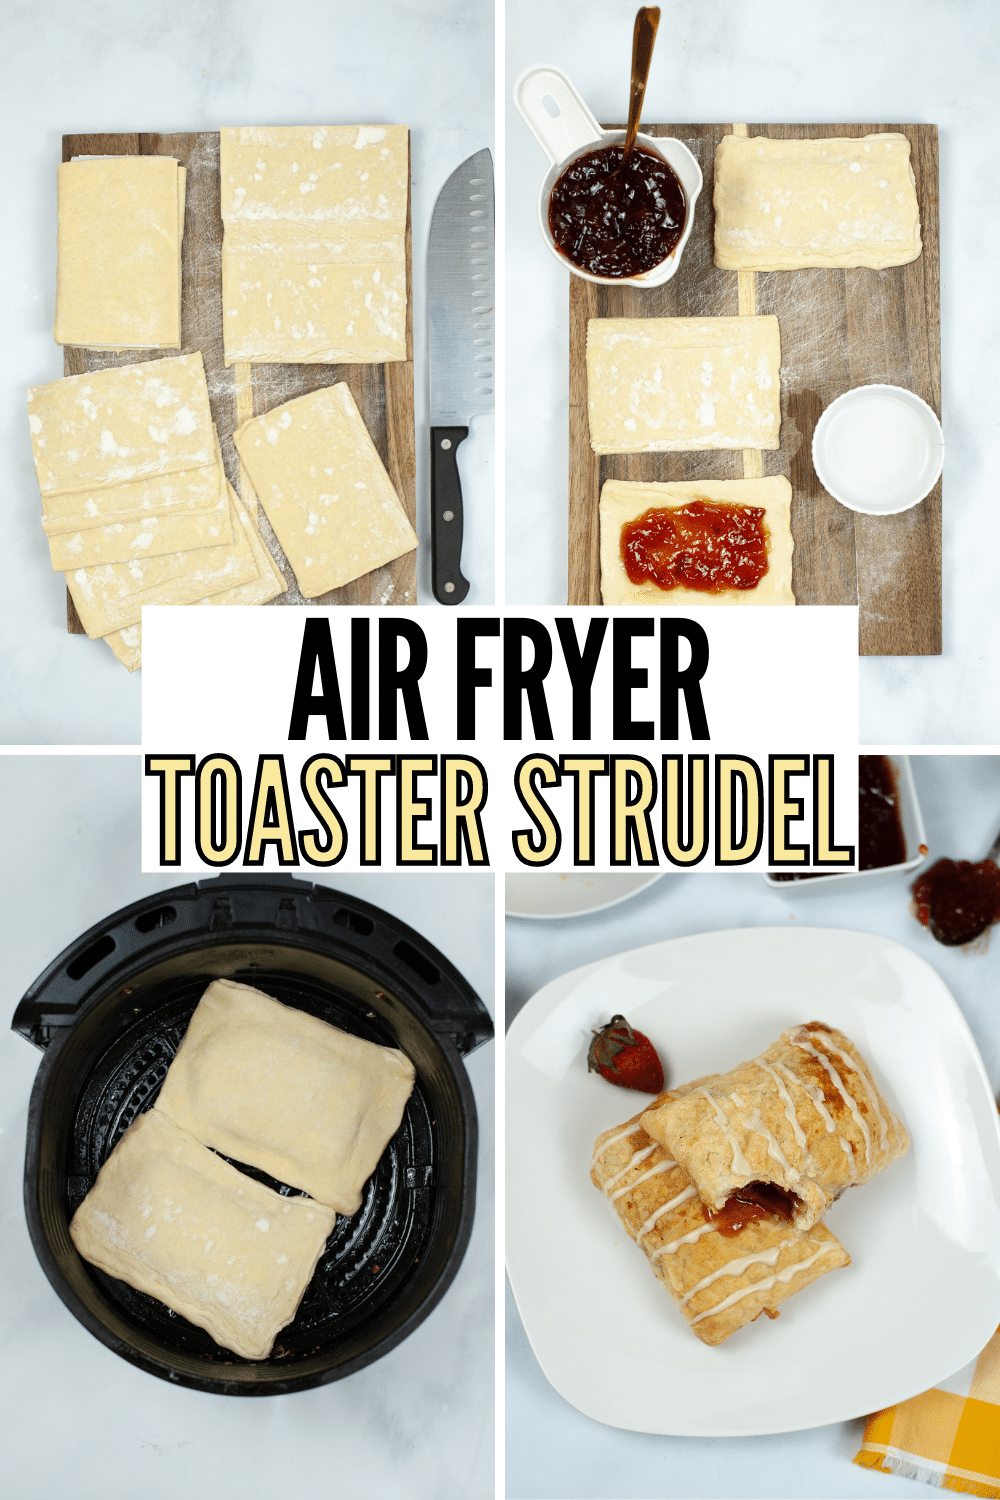 Air Fryer Toaster Strudel is easy to make and turns out perfectly flaky and sweet. This homemade version will be a success with your family. #airfryer #toasterstrudel #homemade #breakfast #recipe via @wondermomwannab